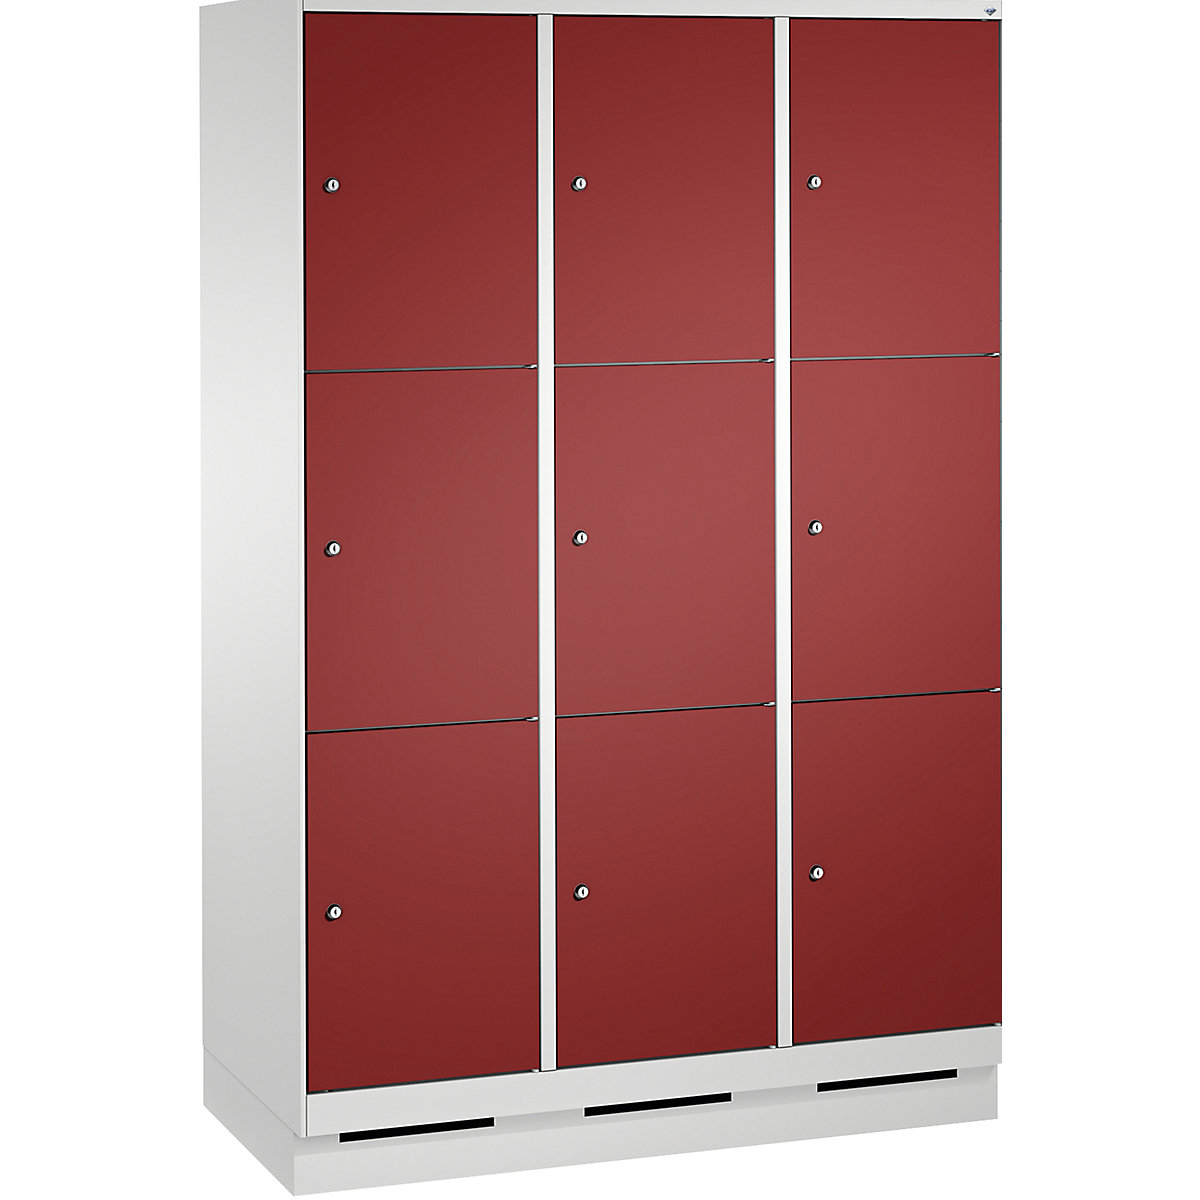 EVOLO locker unit, with plinth – C+P, 3 compartments, 3 shelf compartments each, compartment width 400 mm, light grey / ruby red-2